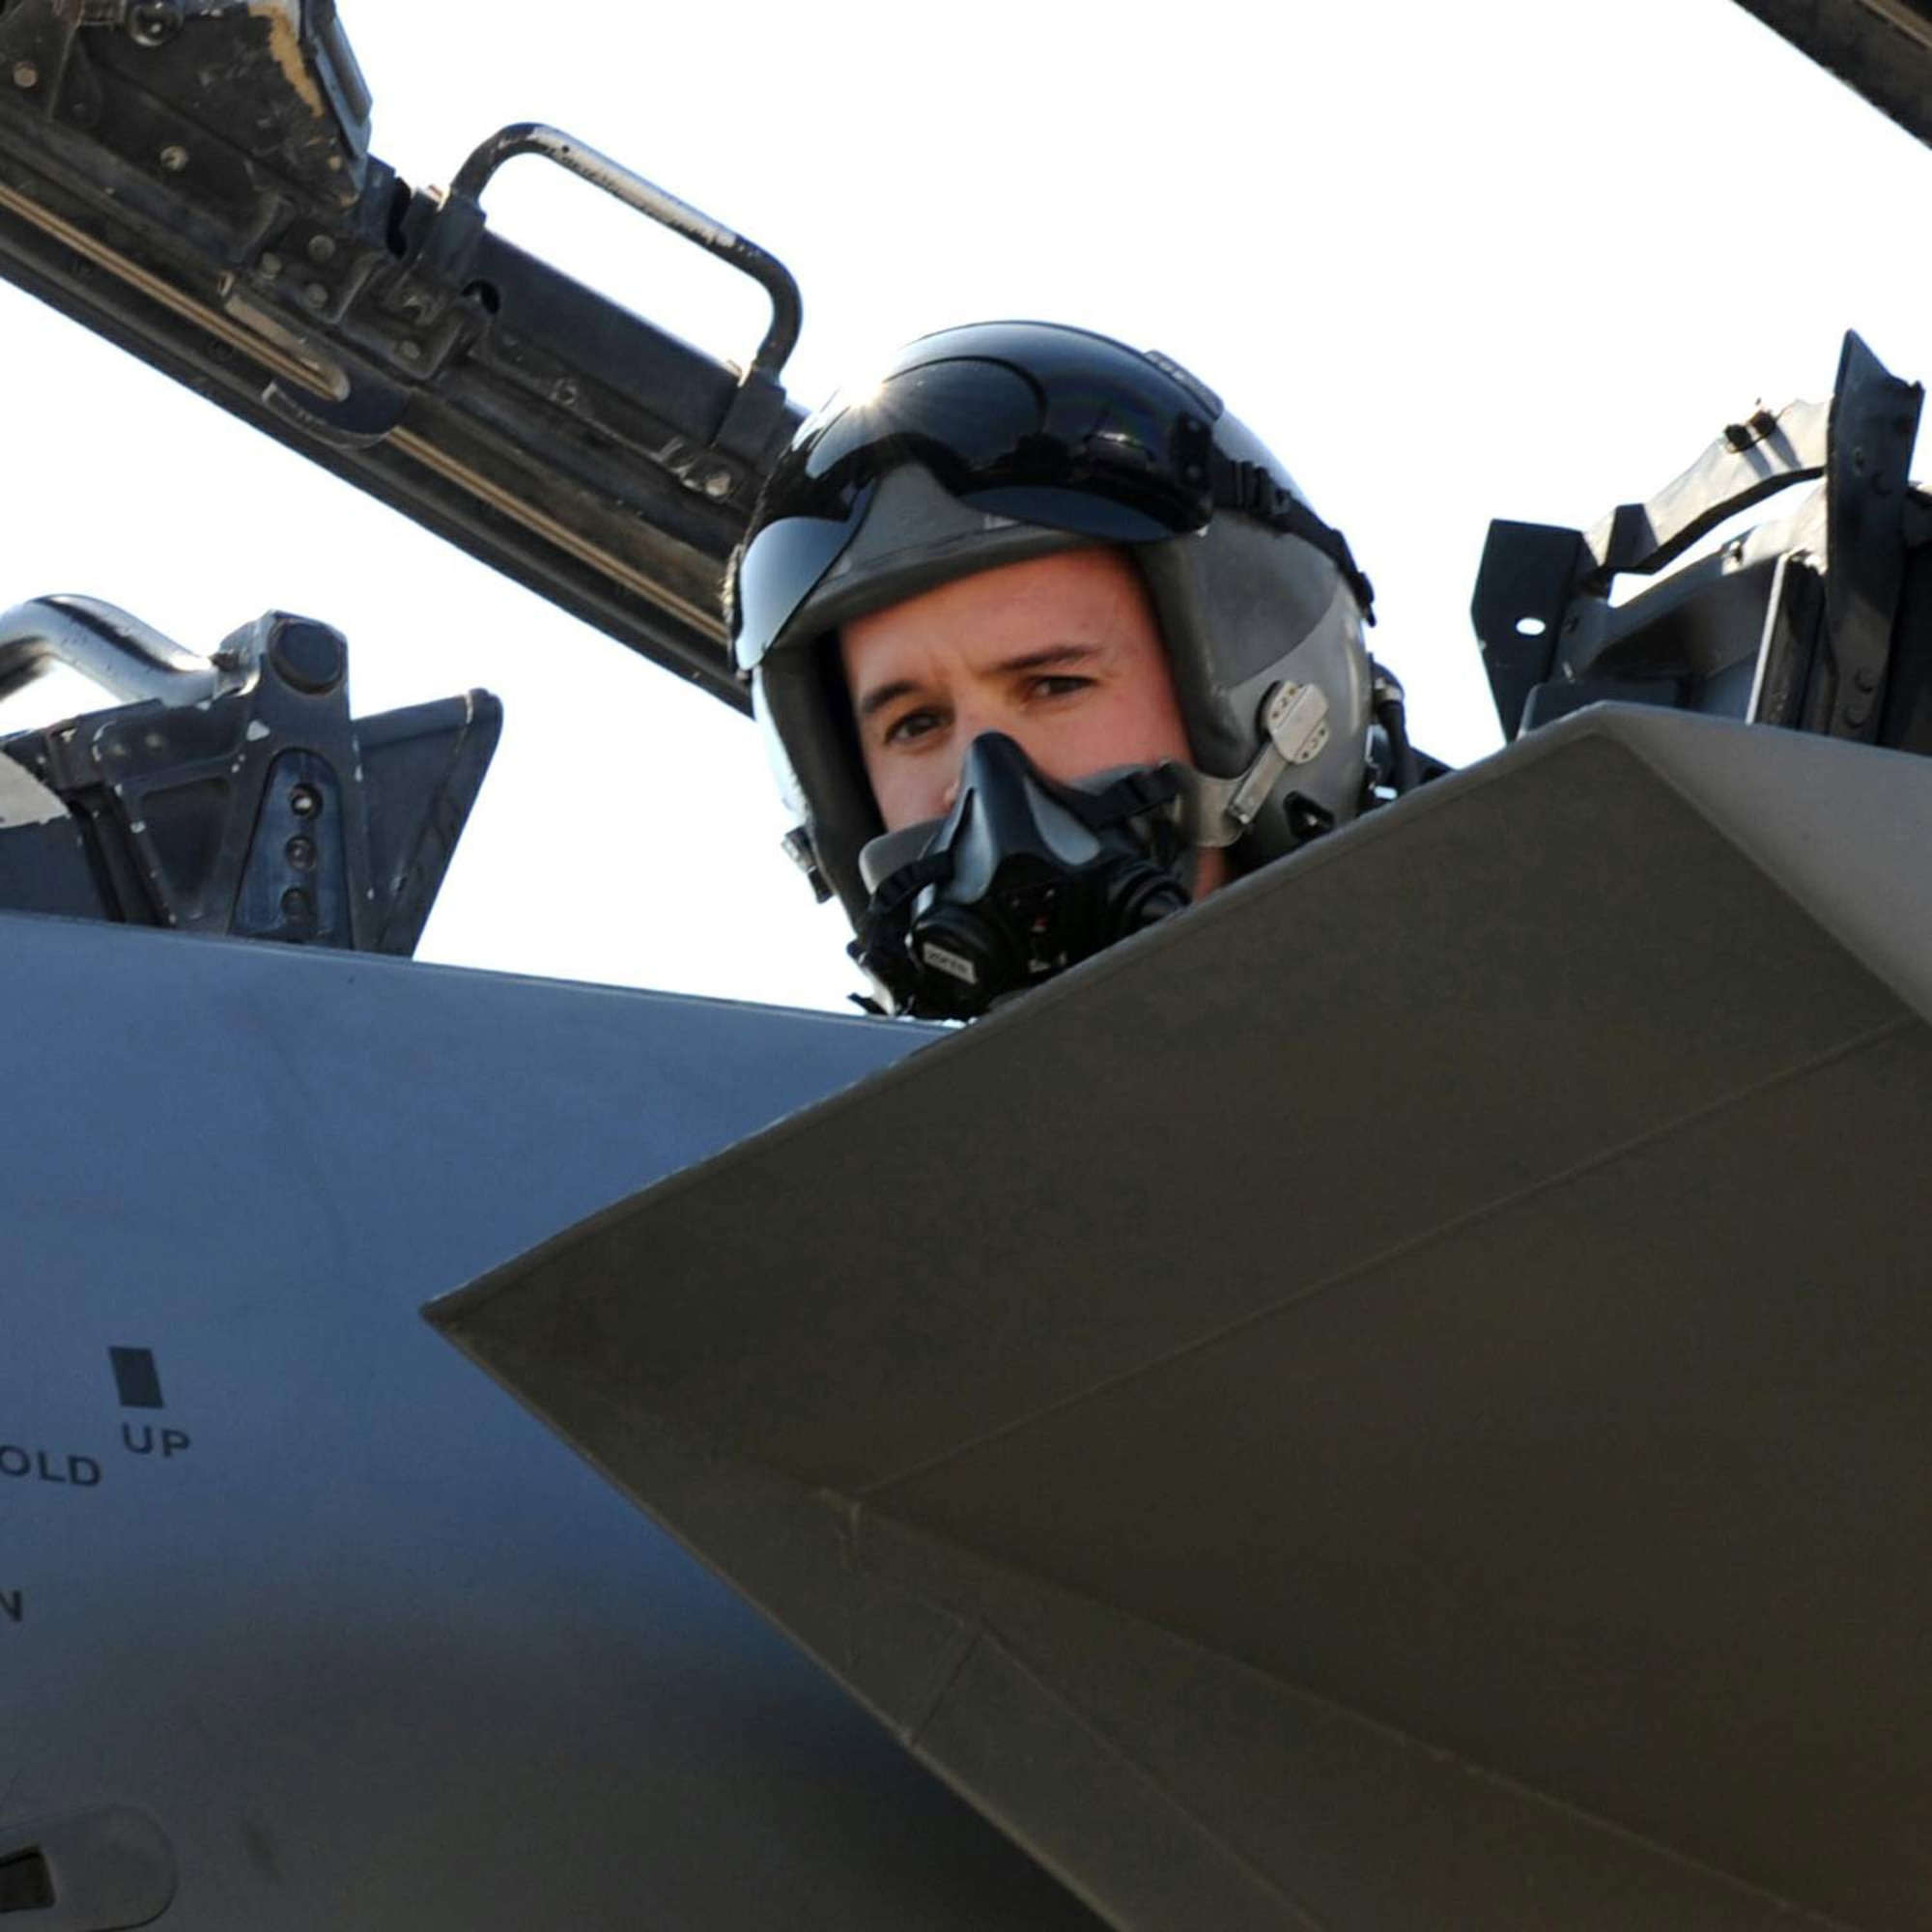 Captain Prichard Keely prepares for take off in his F-15E Strike Eagle Feb. 23 from Seymour Johnson Air Force Base, N.C. In April 2008, Captain Keely is a 335th Fighter Squadron weapons systems officer, and his aircrew from the 335th FS provided close-air support for ground forces during a massive firefight in Shok Valley, Afghanistan. The 335th FS was deployed in support of Operation Enduring Freedom. (U.S. Air Force photo/Airman 1st Class Gino Reyes) 
